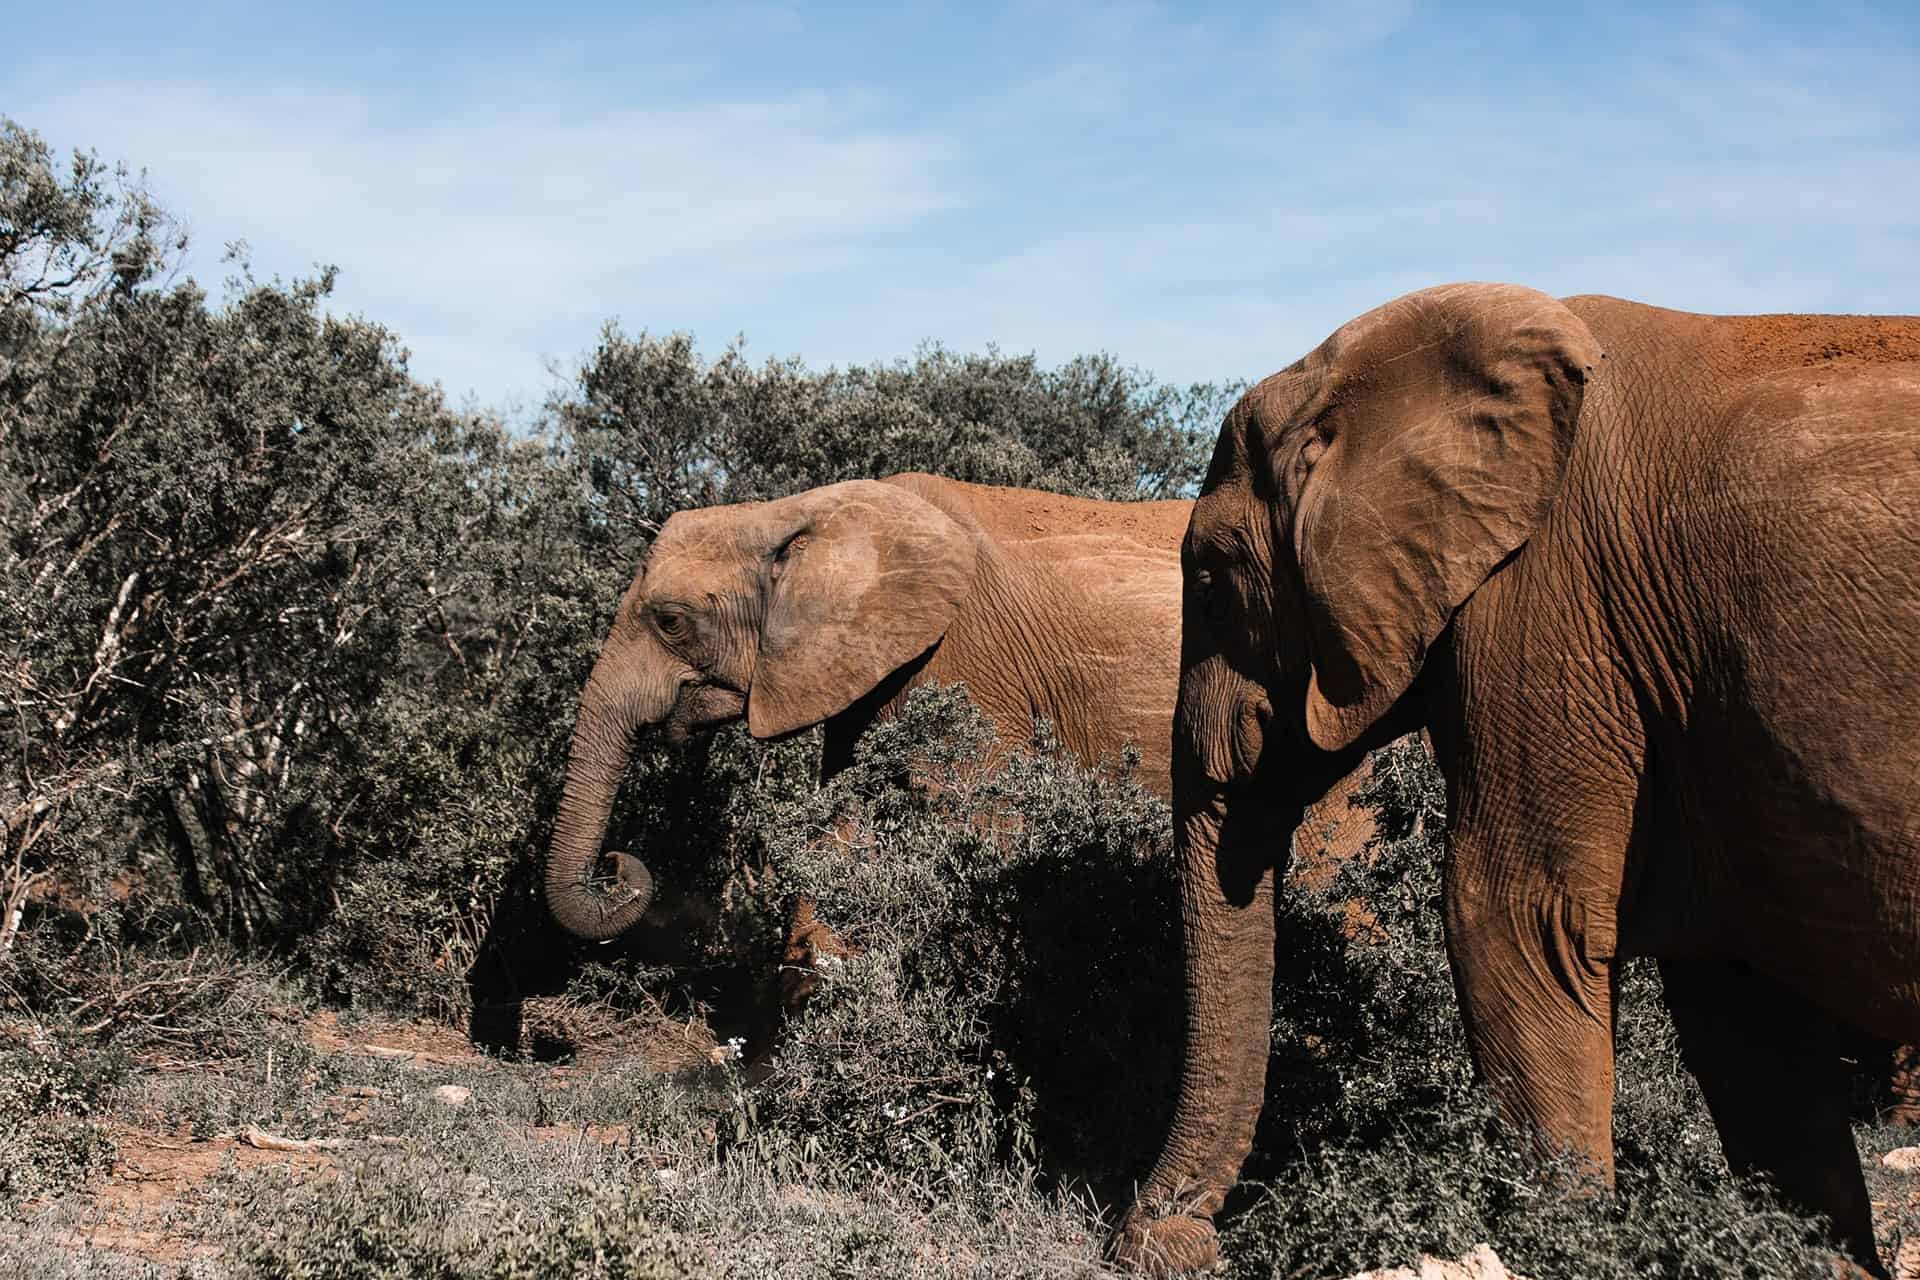 Two elephants walking in a dry savanna habitat during their first solo trip.